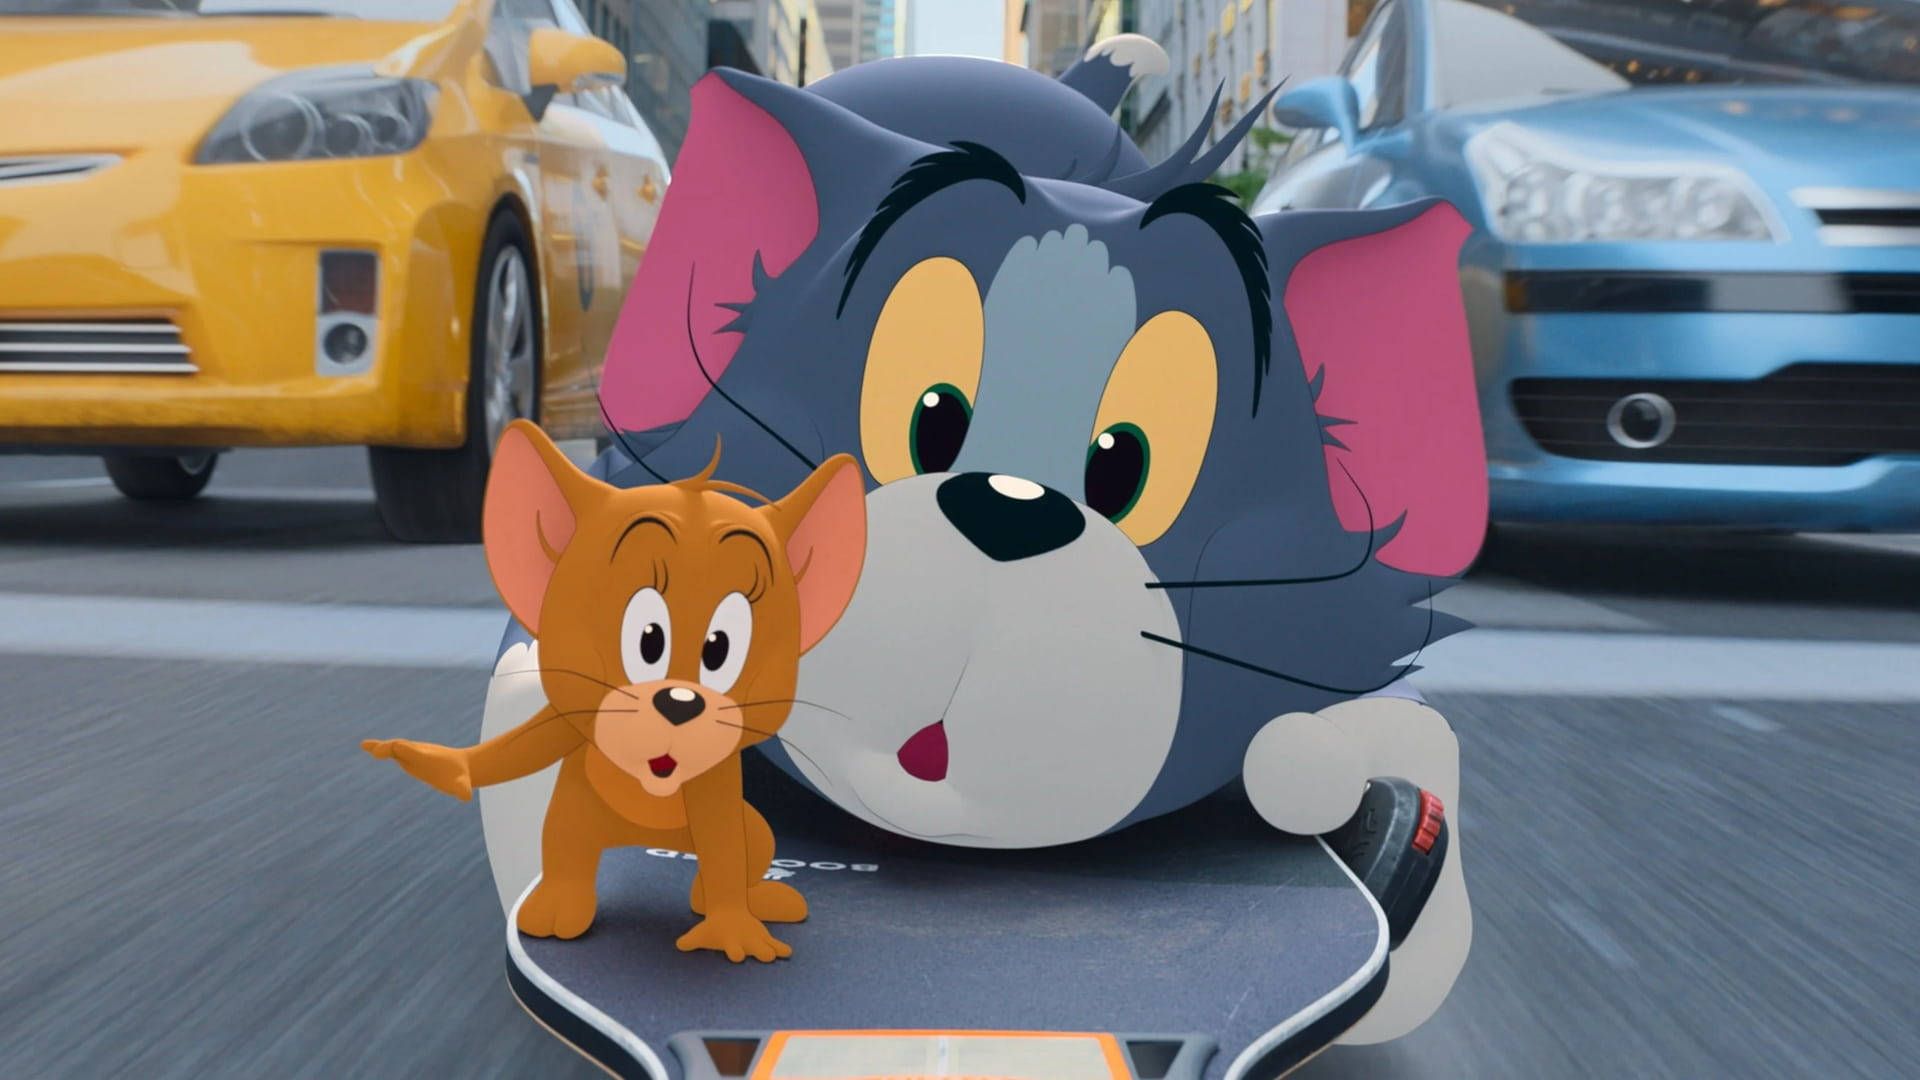 Free Cute Tom And Jerry Wallpaper Downloads, Cute Tom And Jerry Wallpaper for FREE